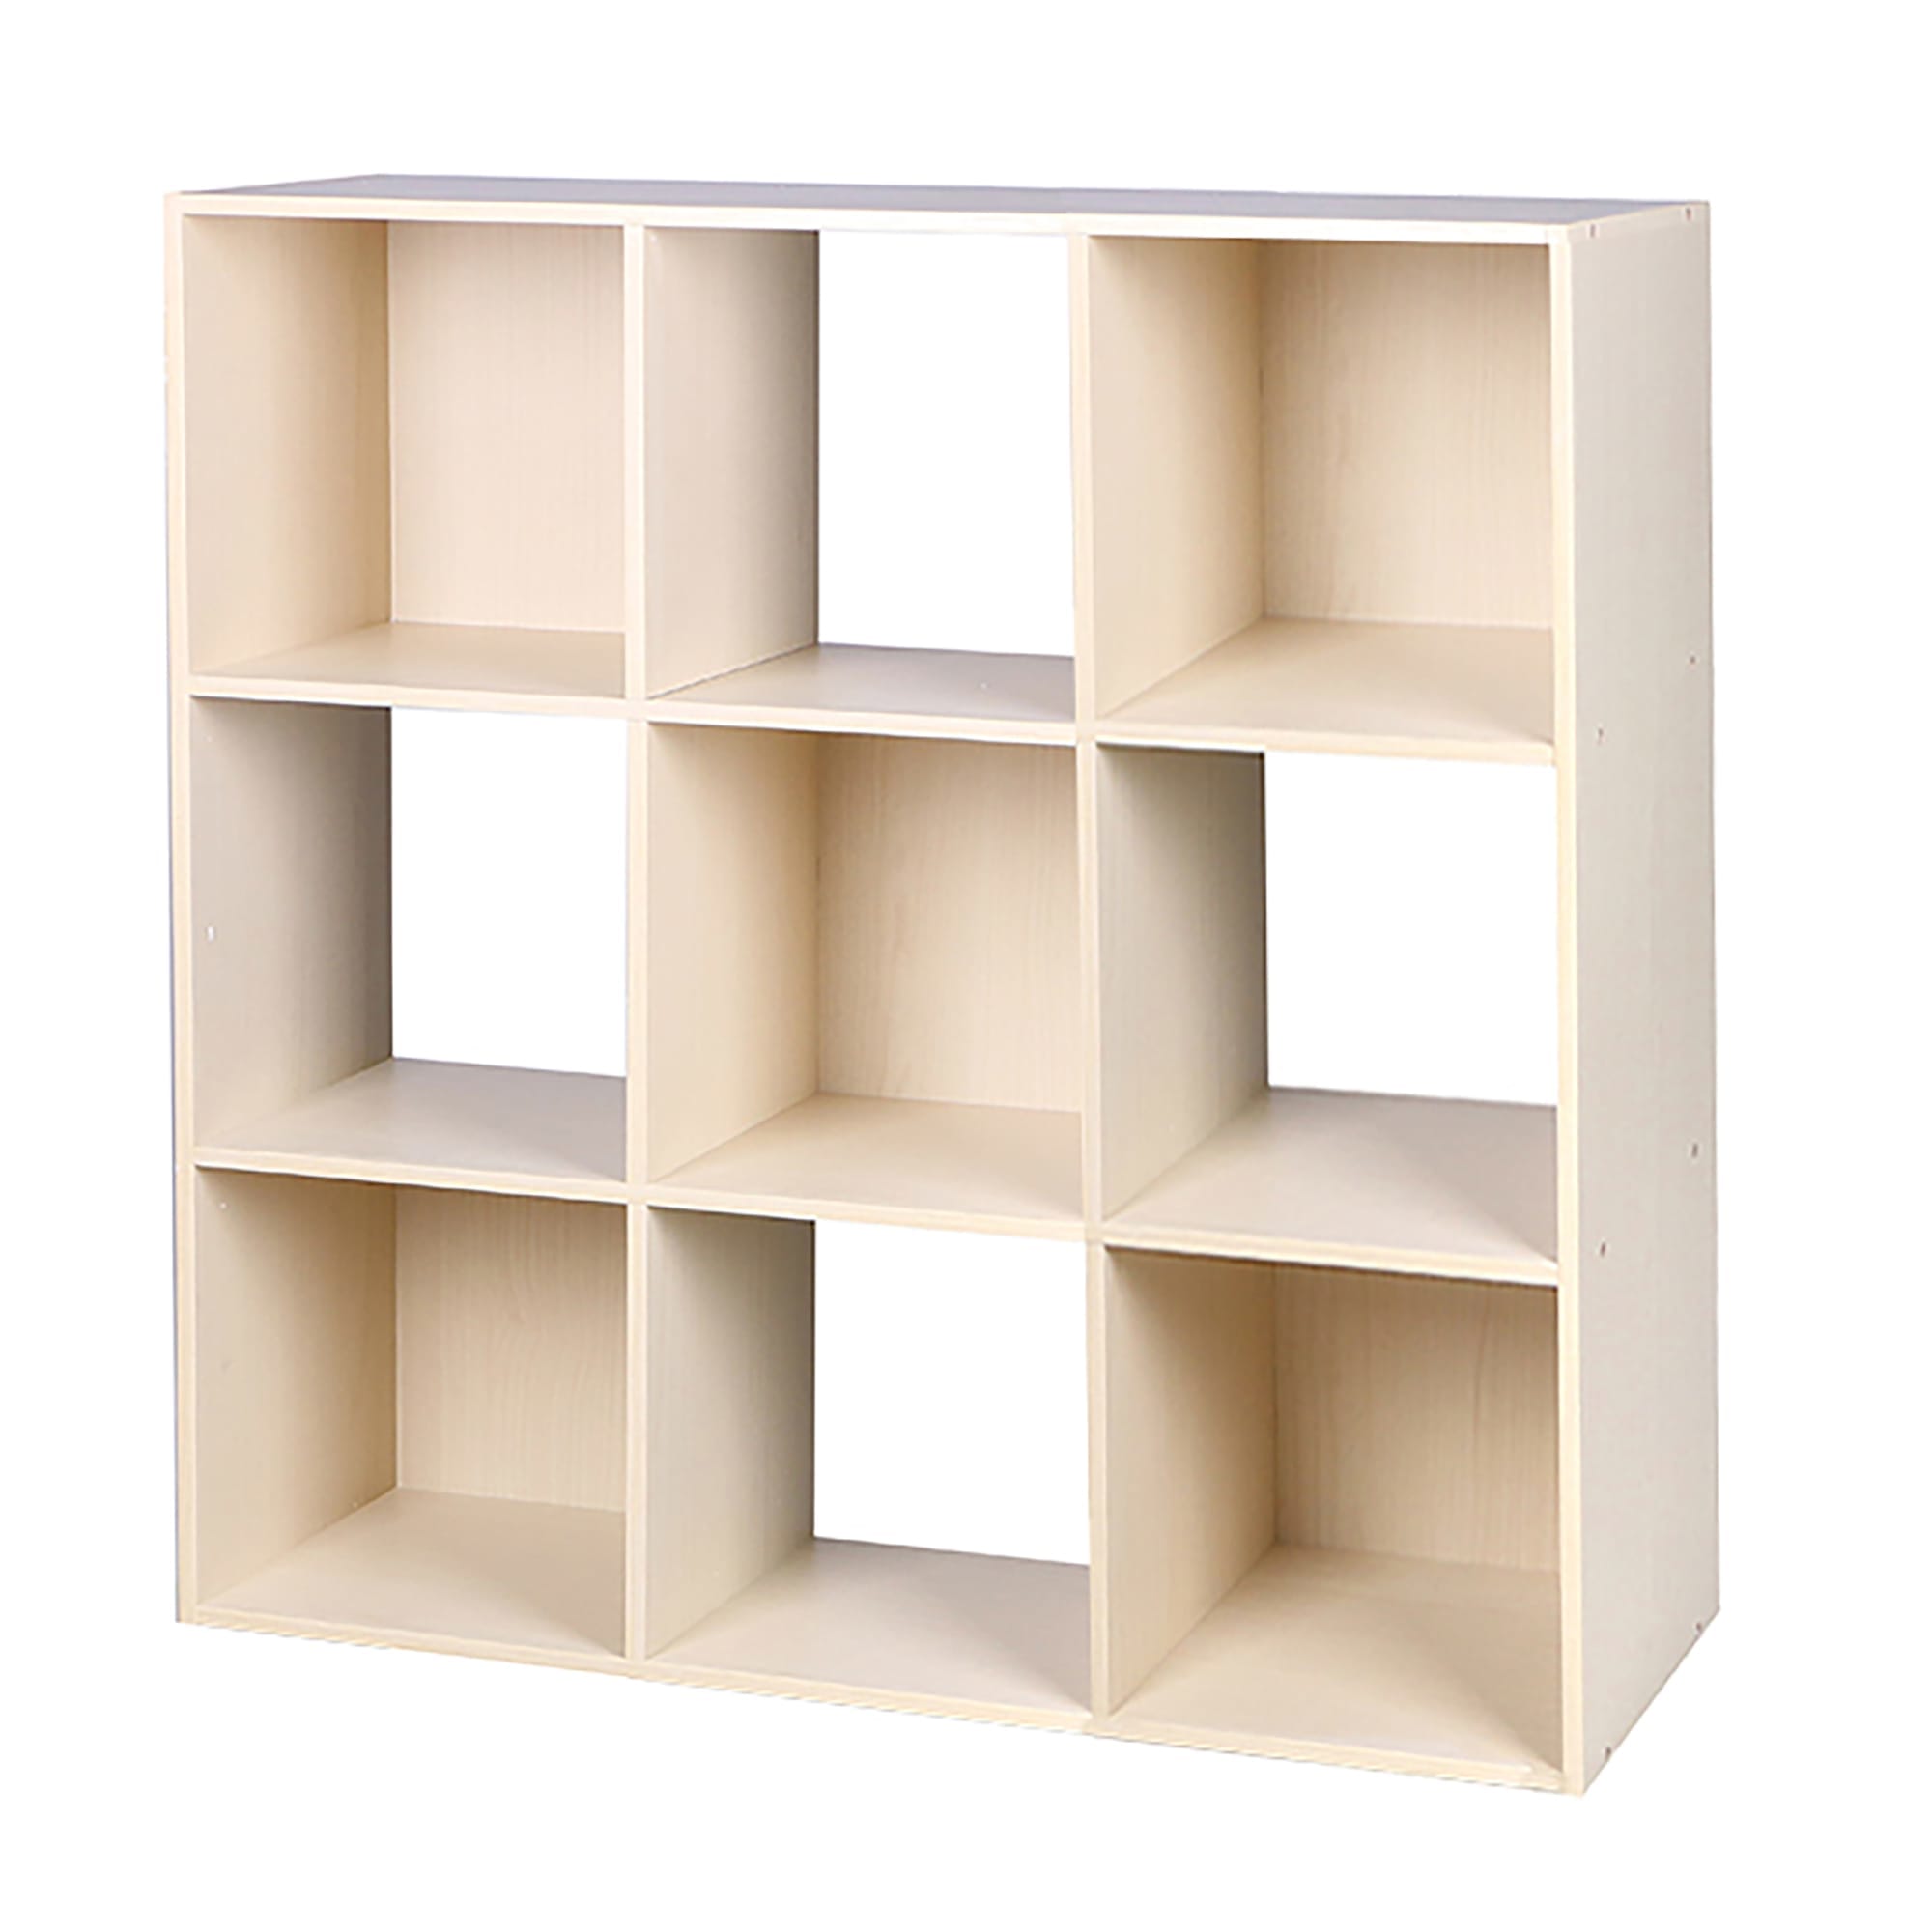 Home Basics Open and Enclosed  9 Cube MDF Storage Organizer, Oak $50.00 EACH, CASE PACK OF 1